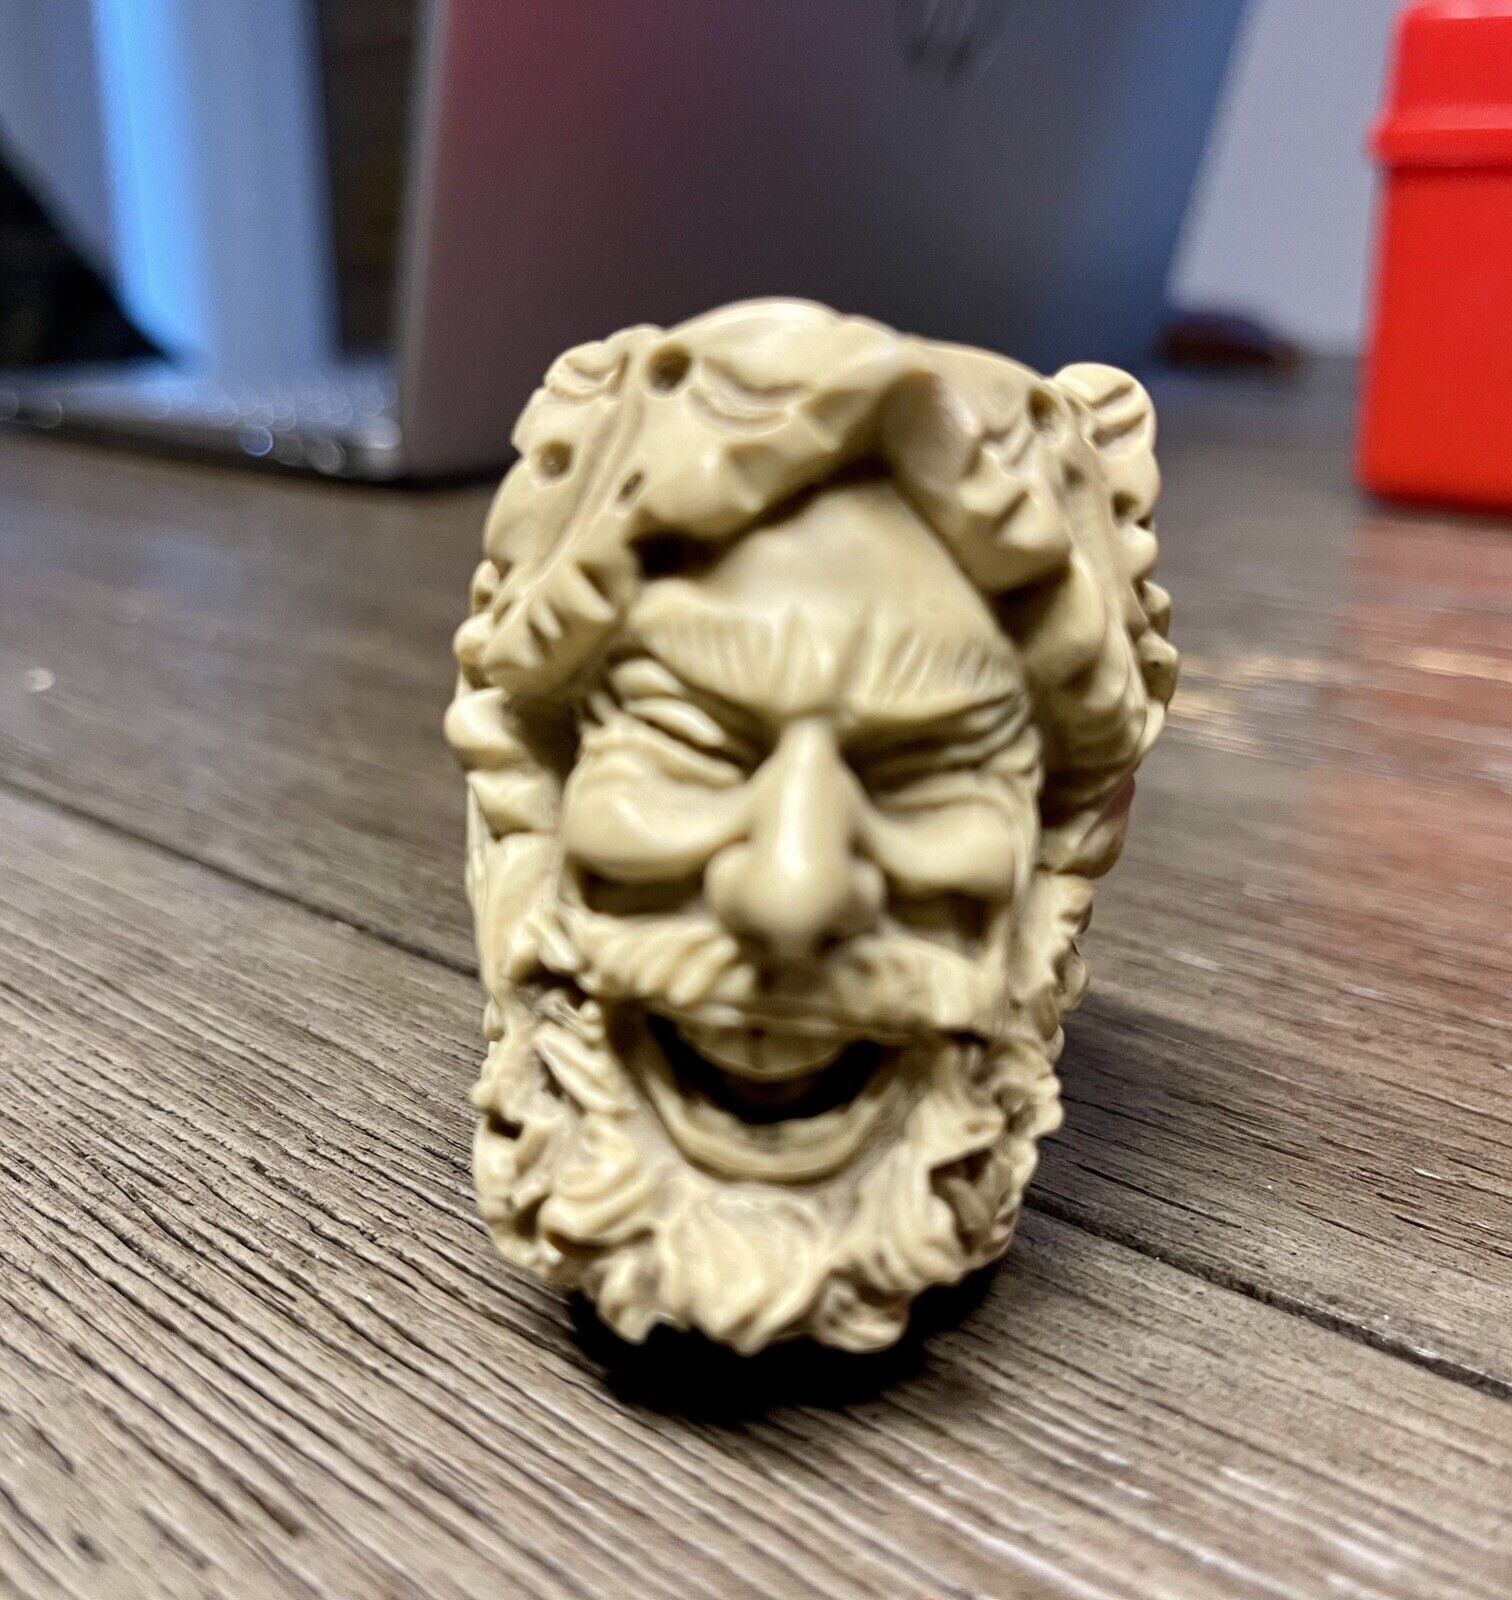 Large Meerschaum Pipe Laughing Man with Beard & Mustache